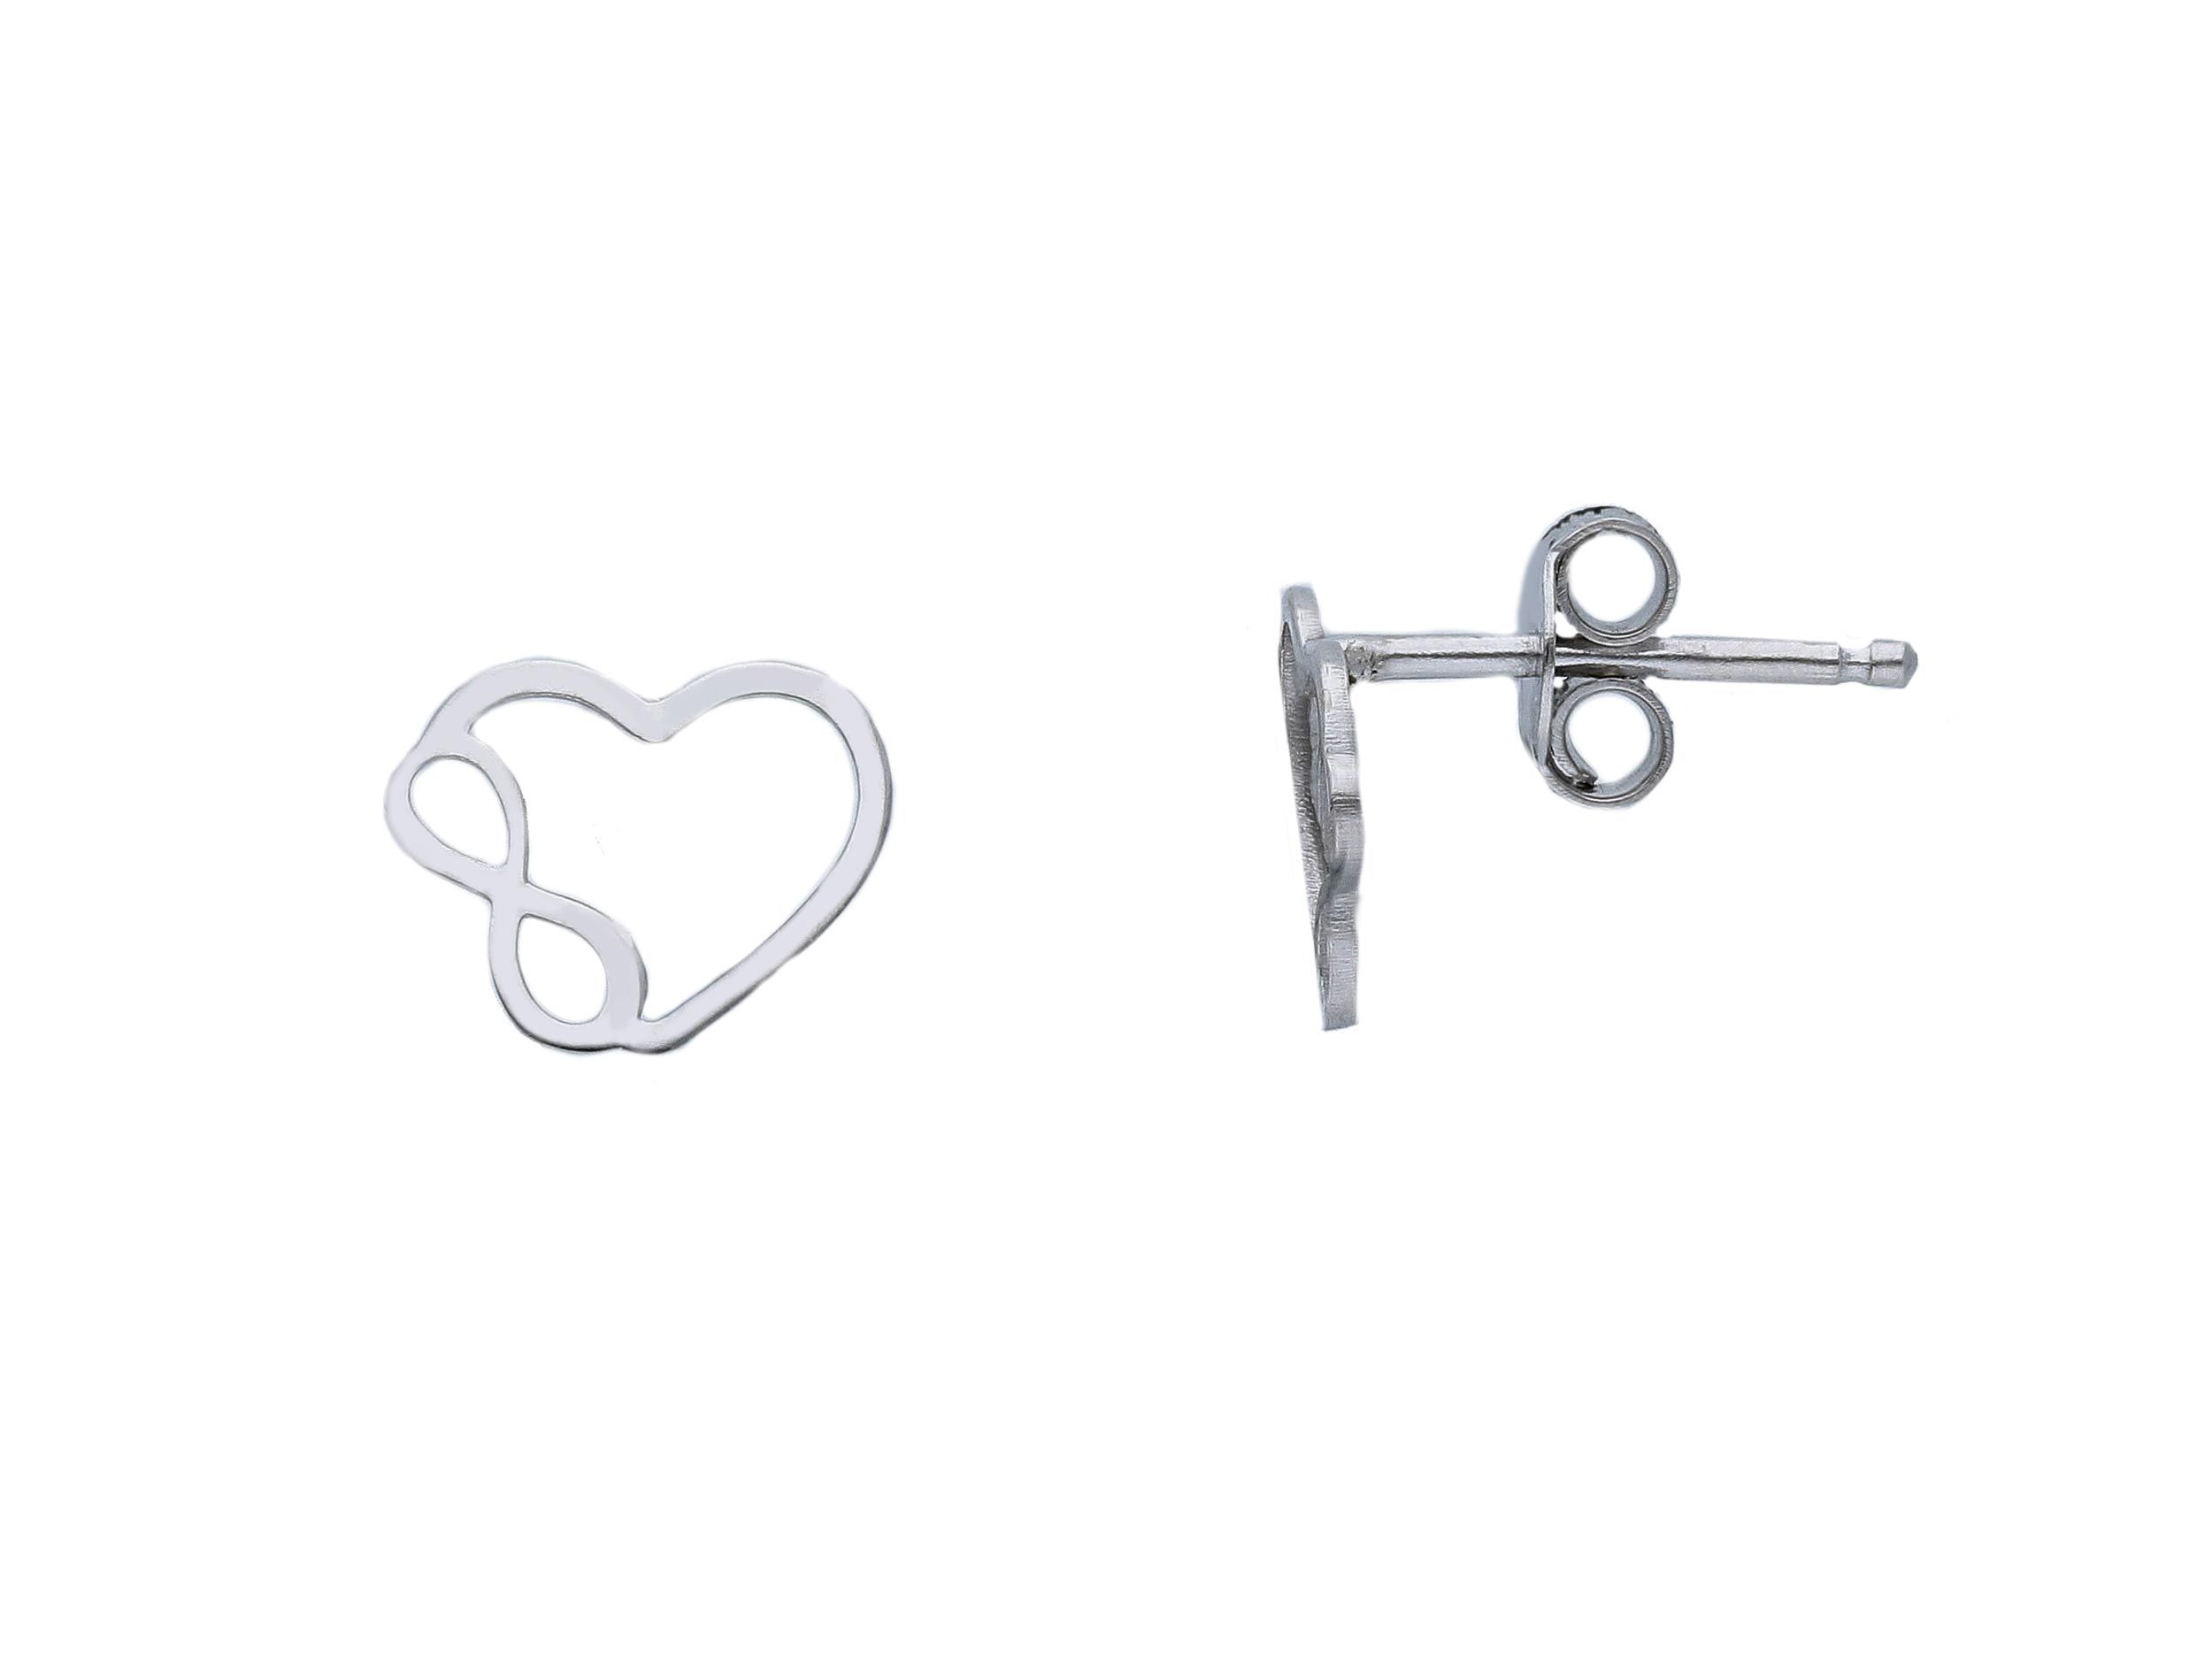  Platinum plated silver 925° heart and infinity symbol earrings (code S250755)